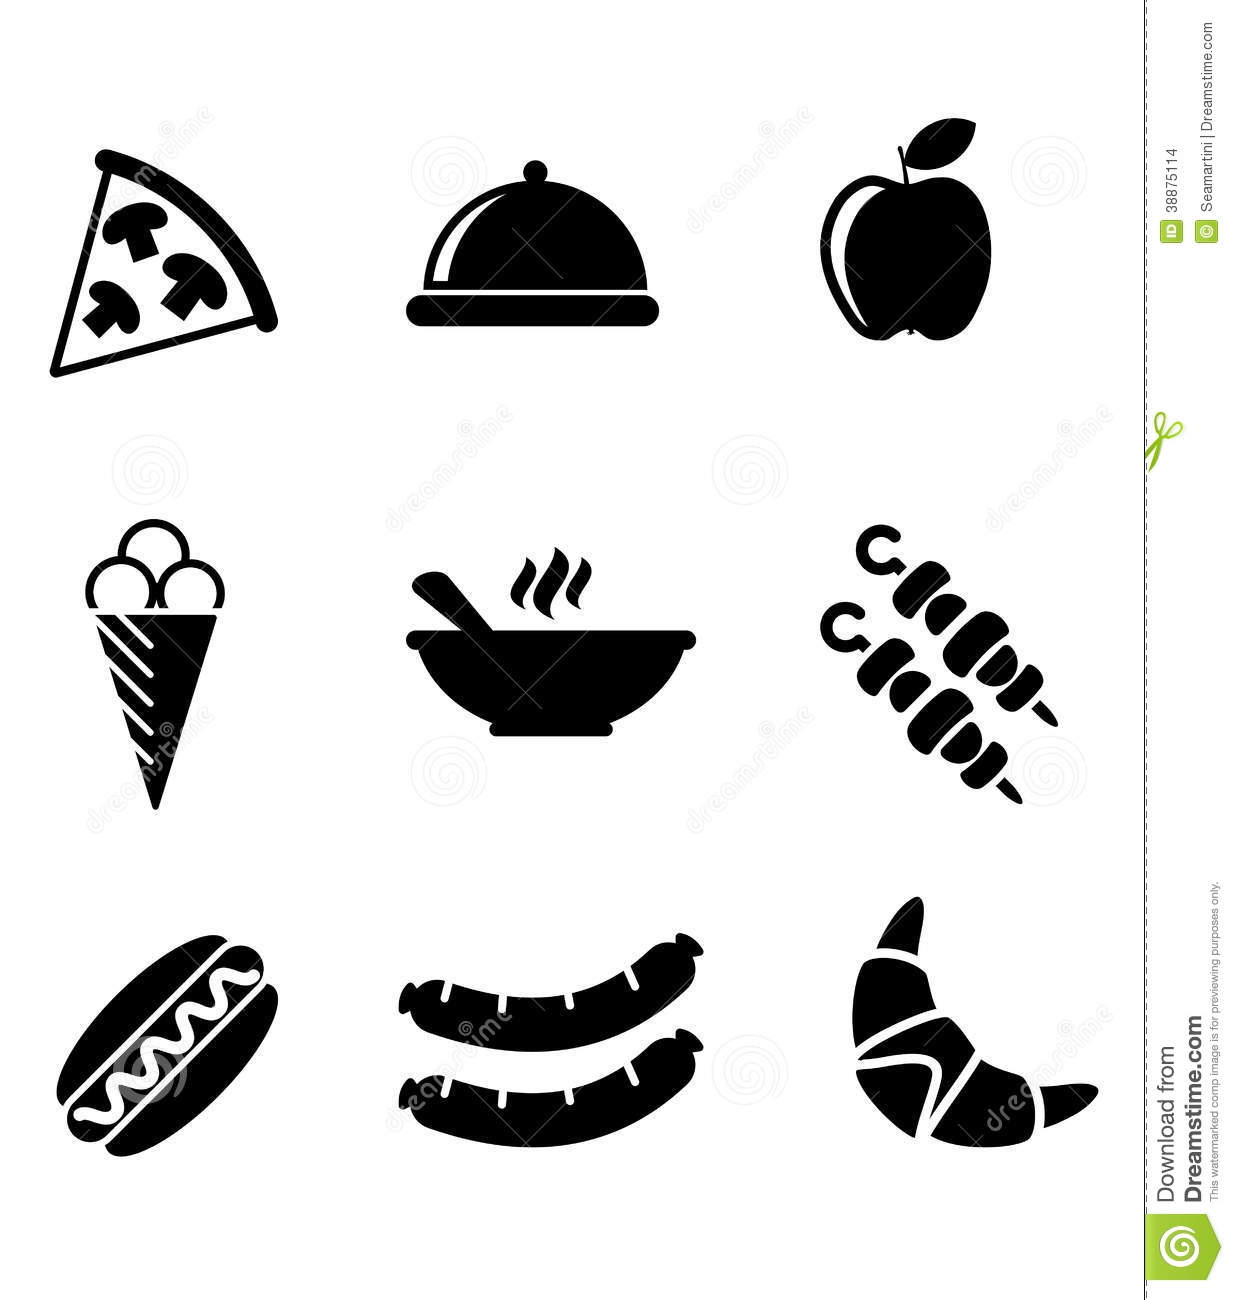 19 Black And White Cone Icon Images